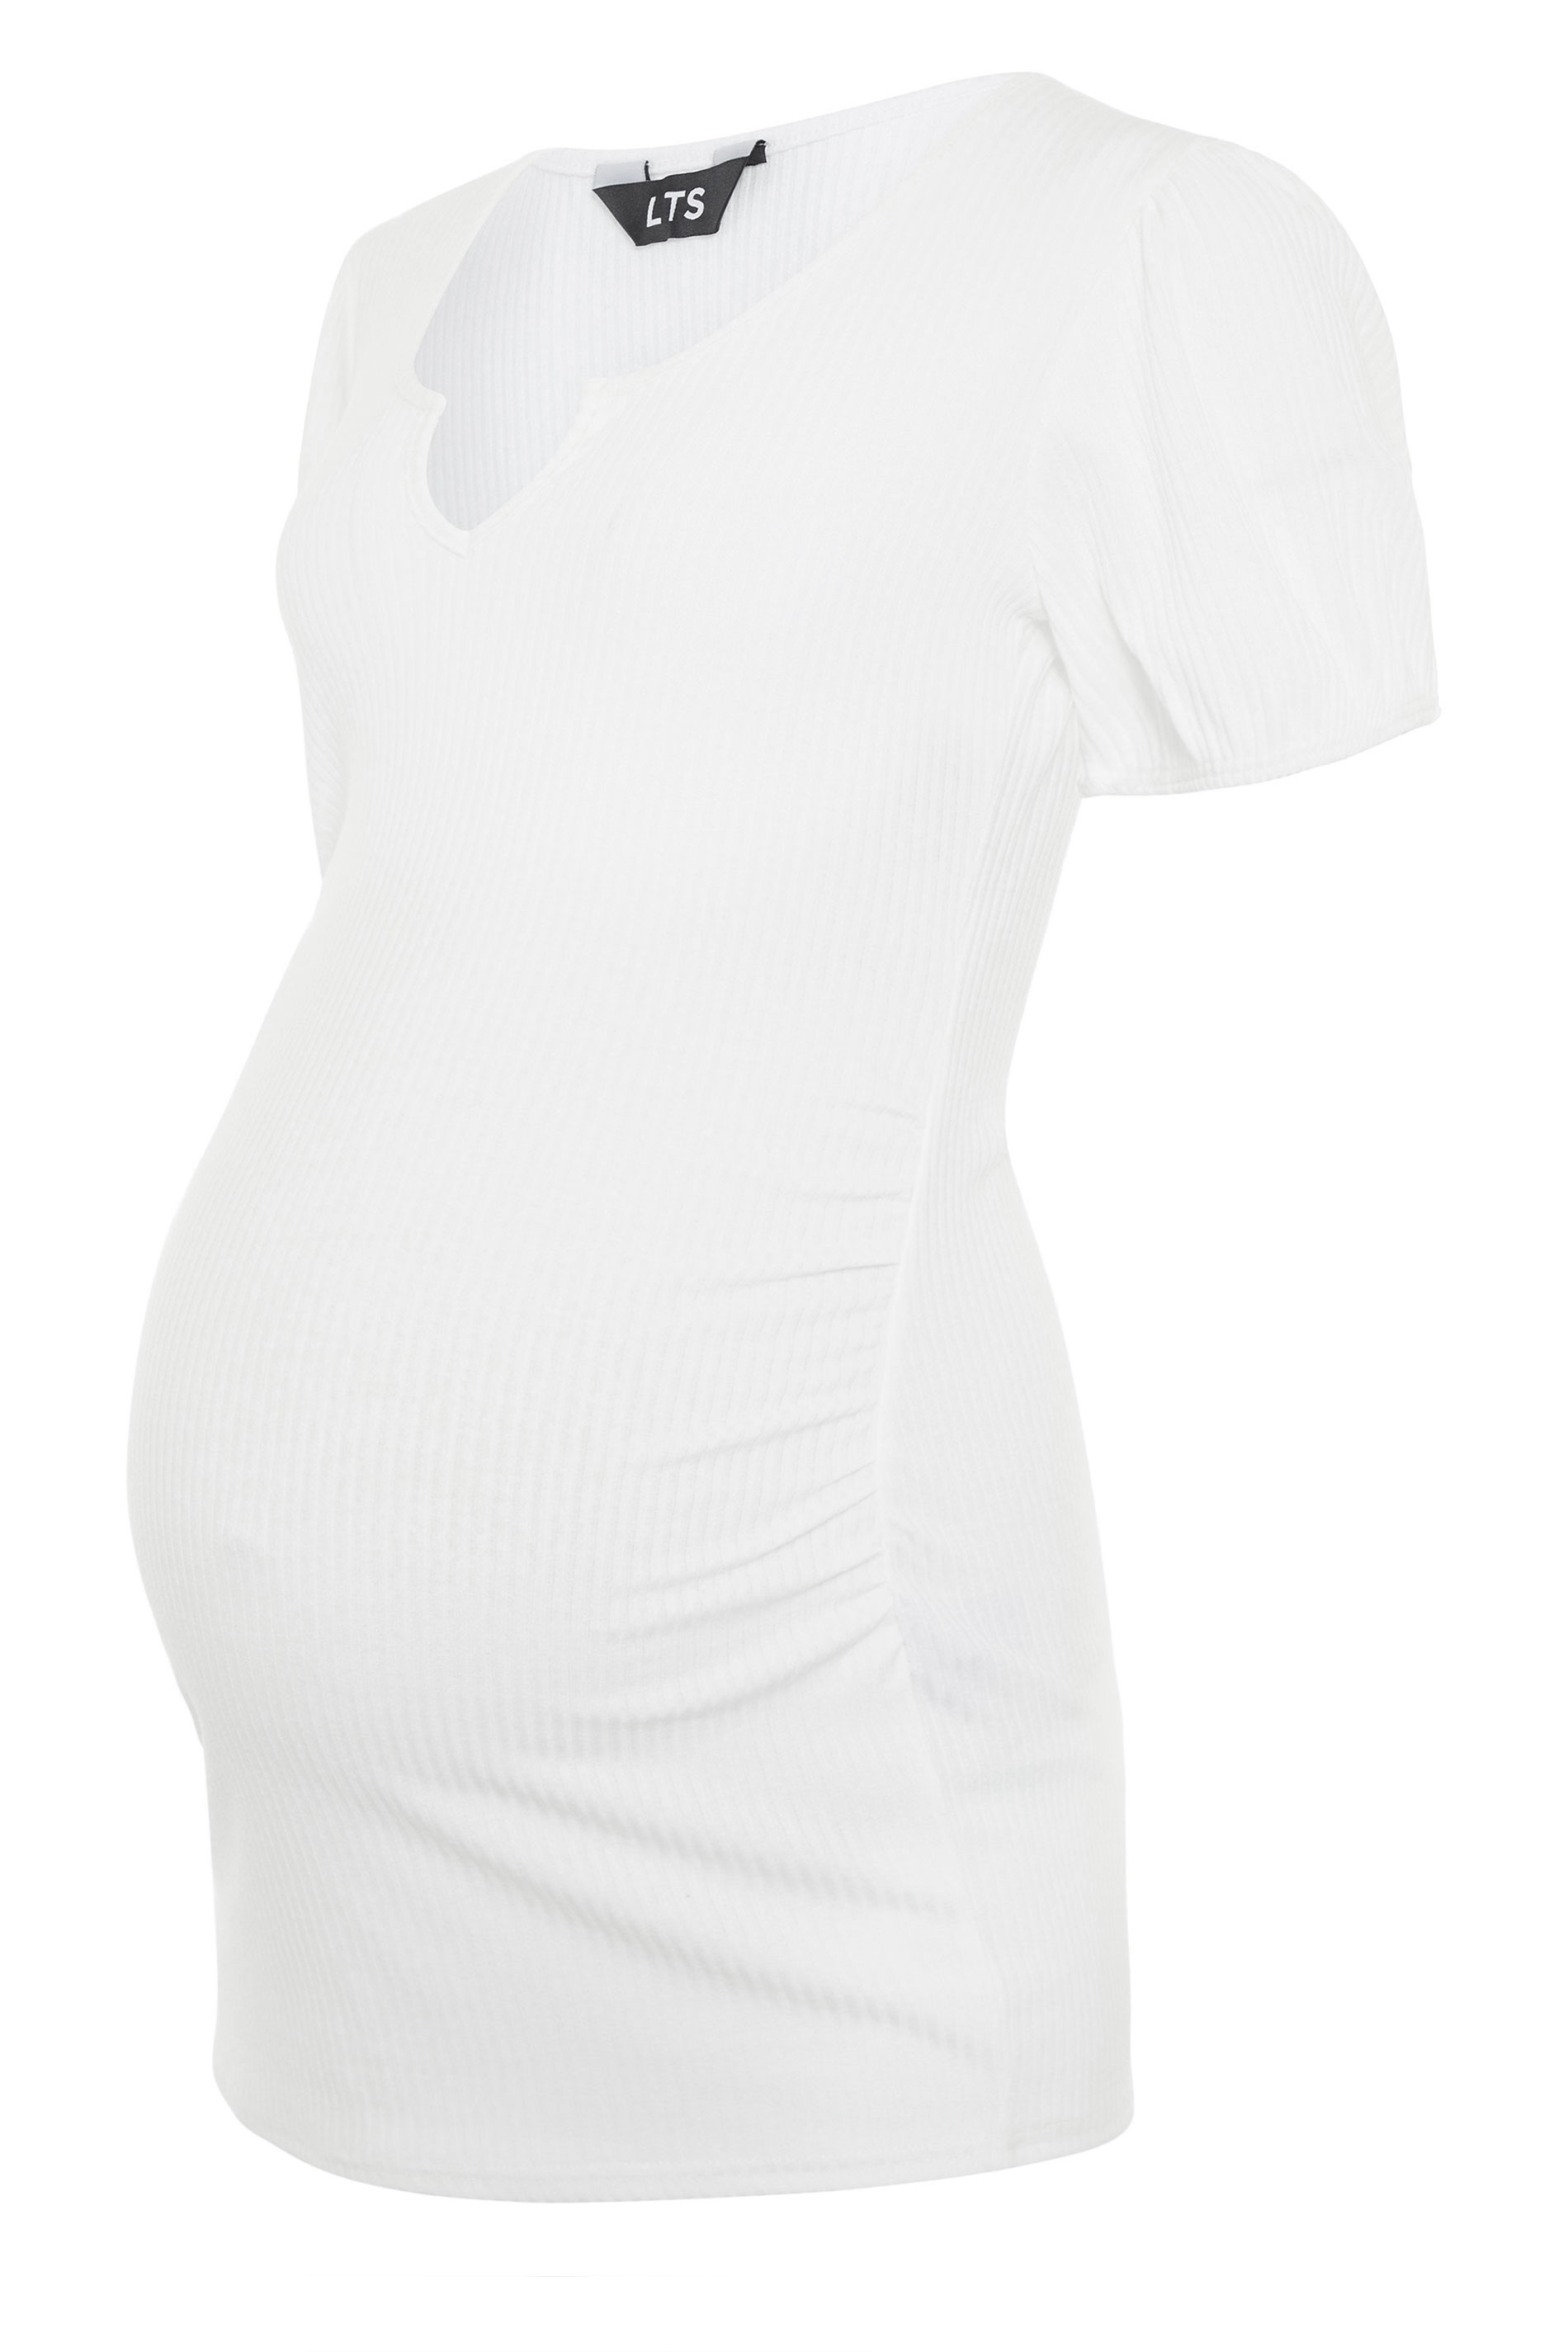 LTS Maternity White Puff Sleeve Top | Long Tall Sally 1